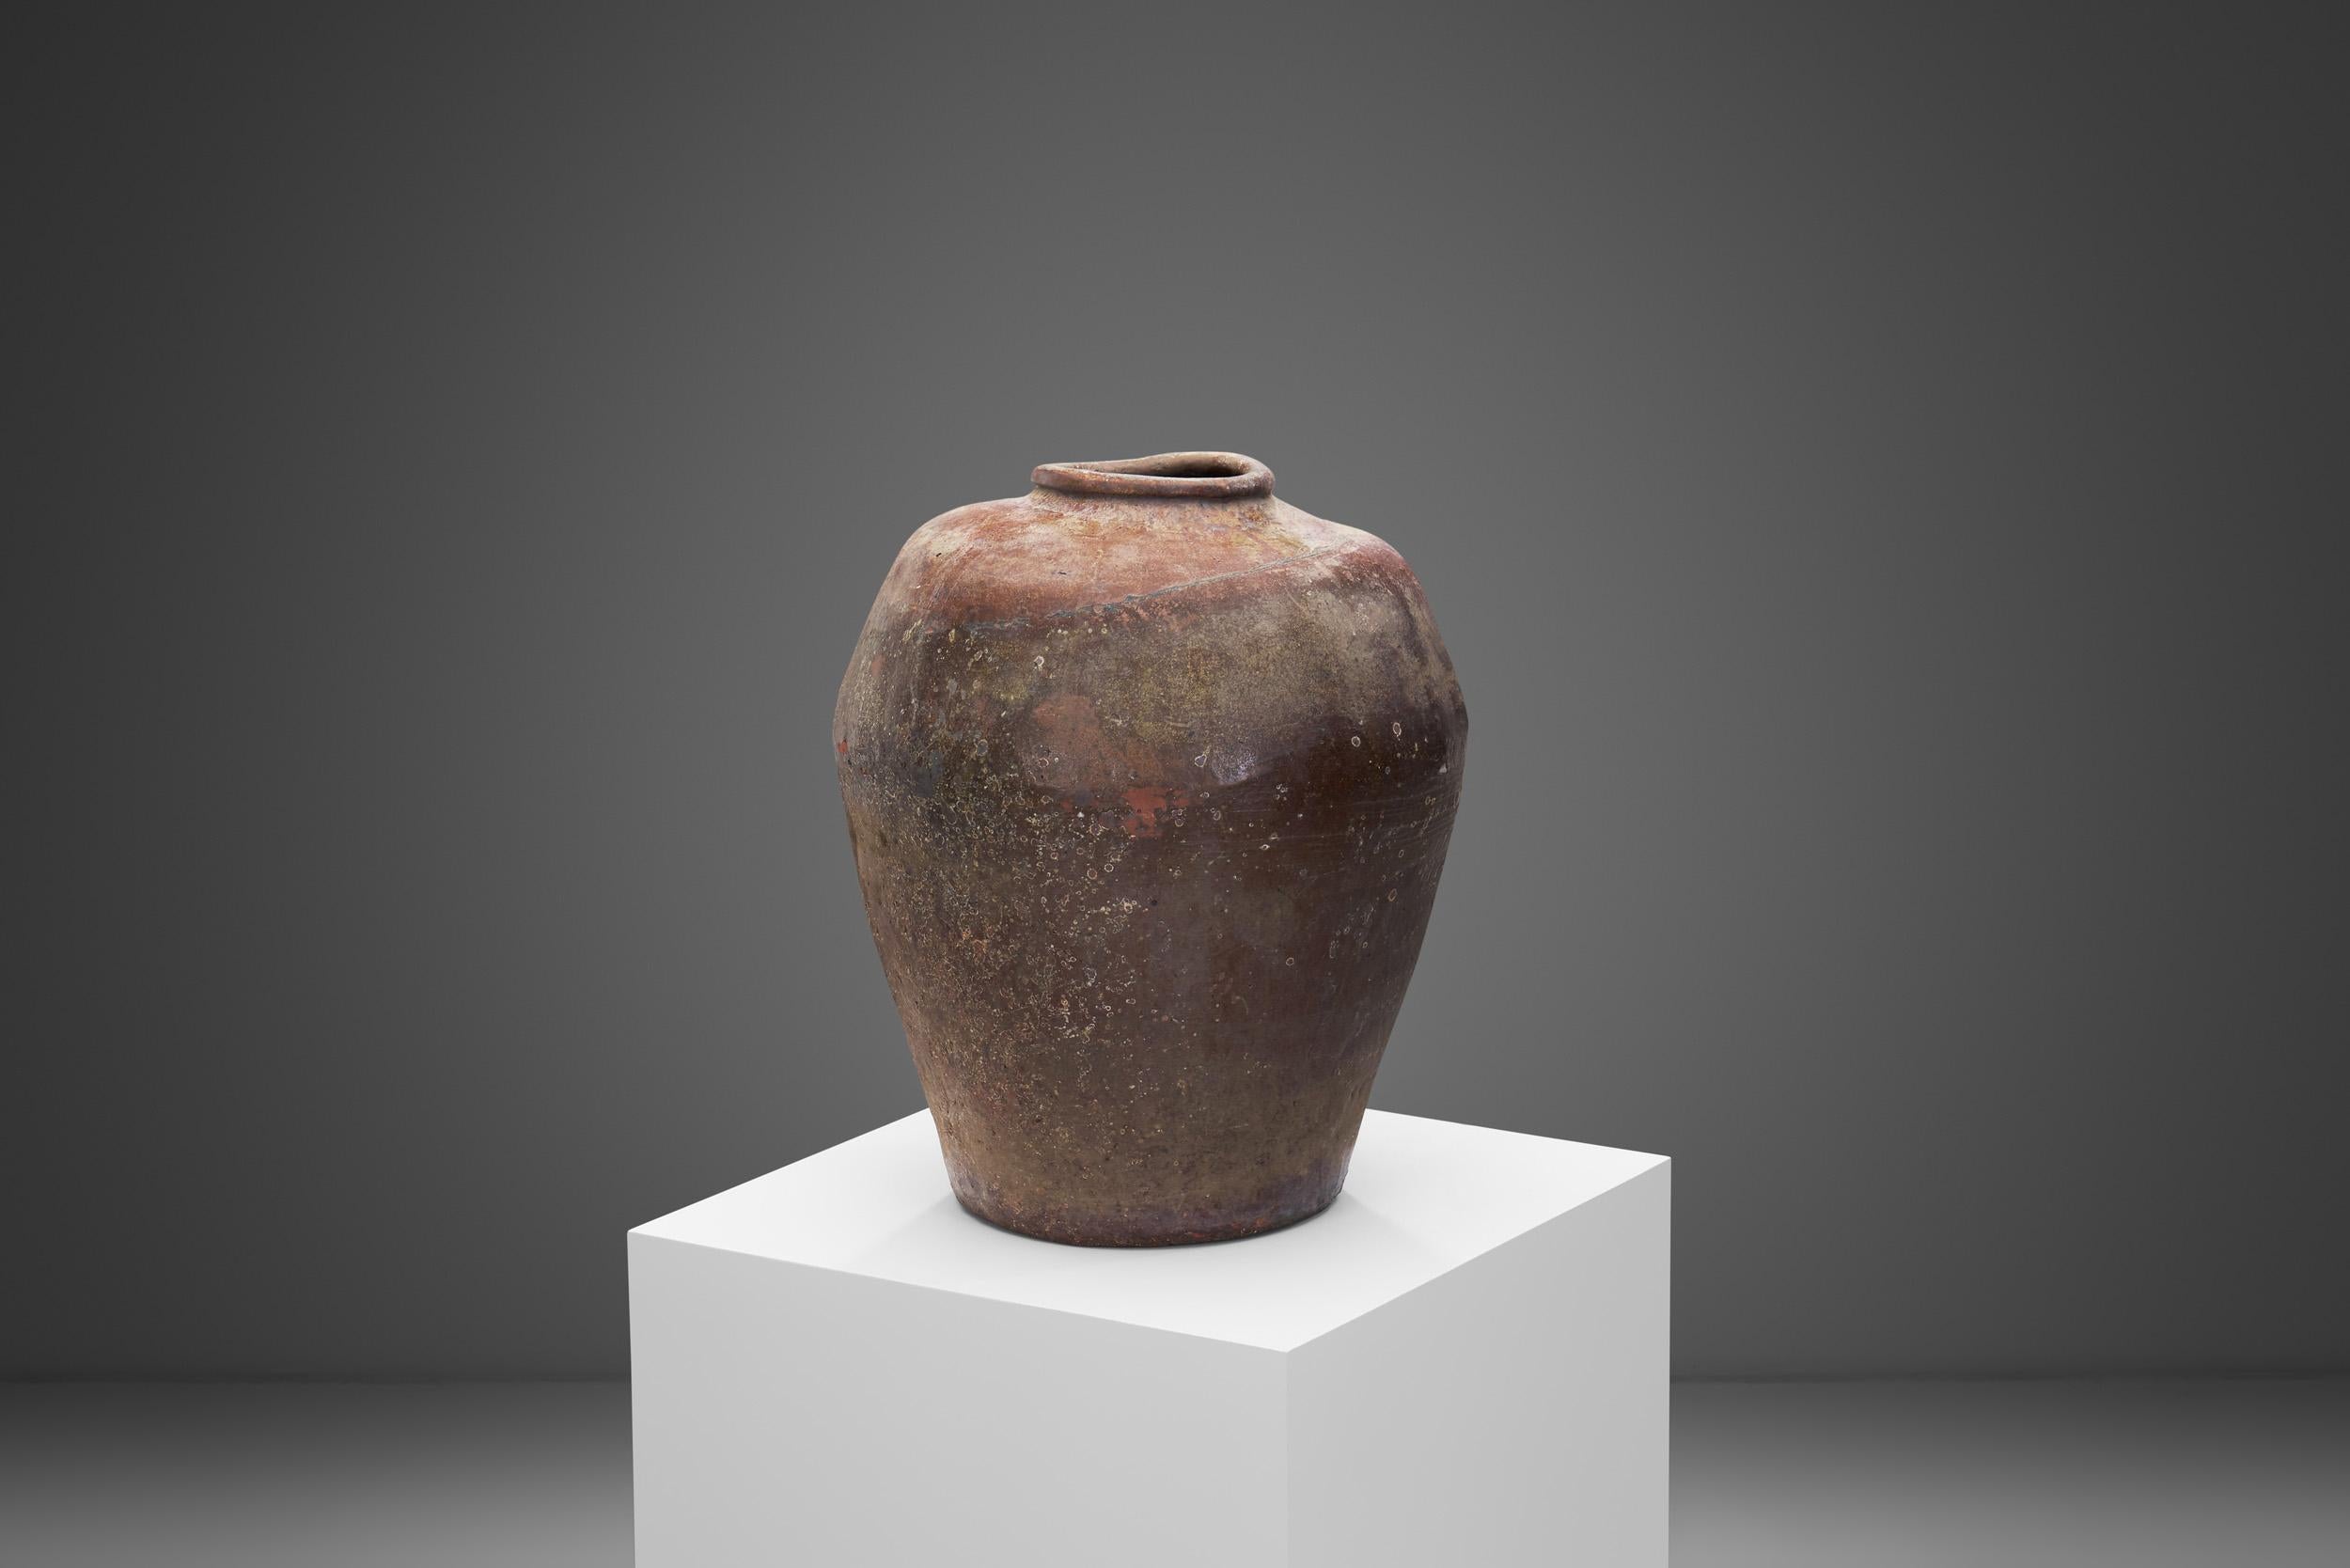 Tribal Indonesian Large Terracotta Water Jar, Indonesia late 19th century